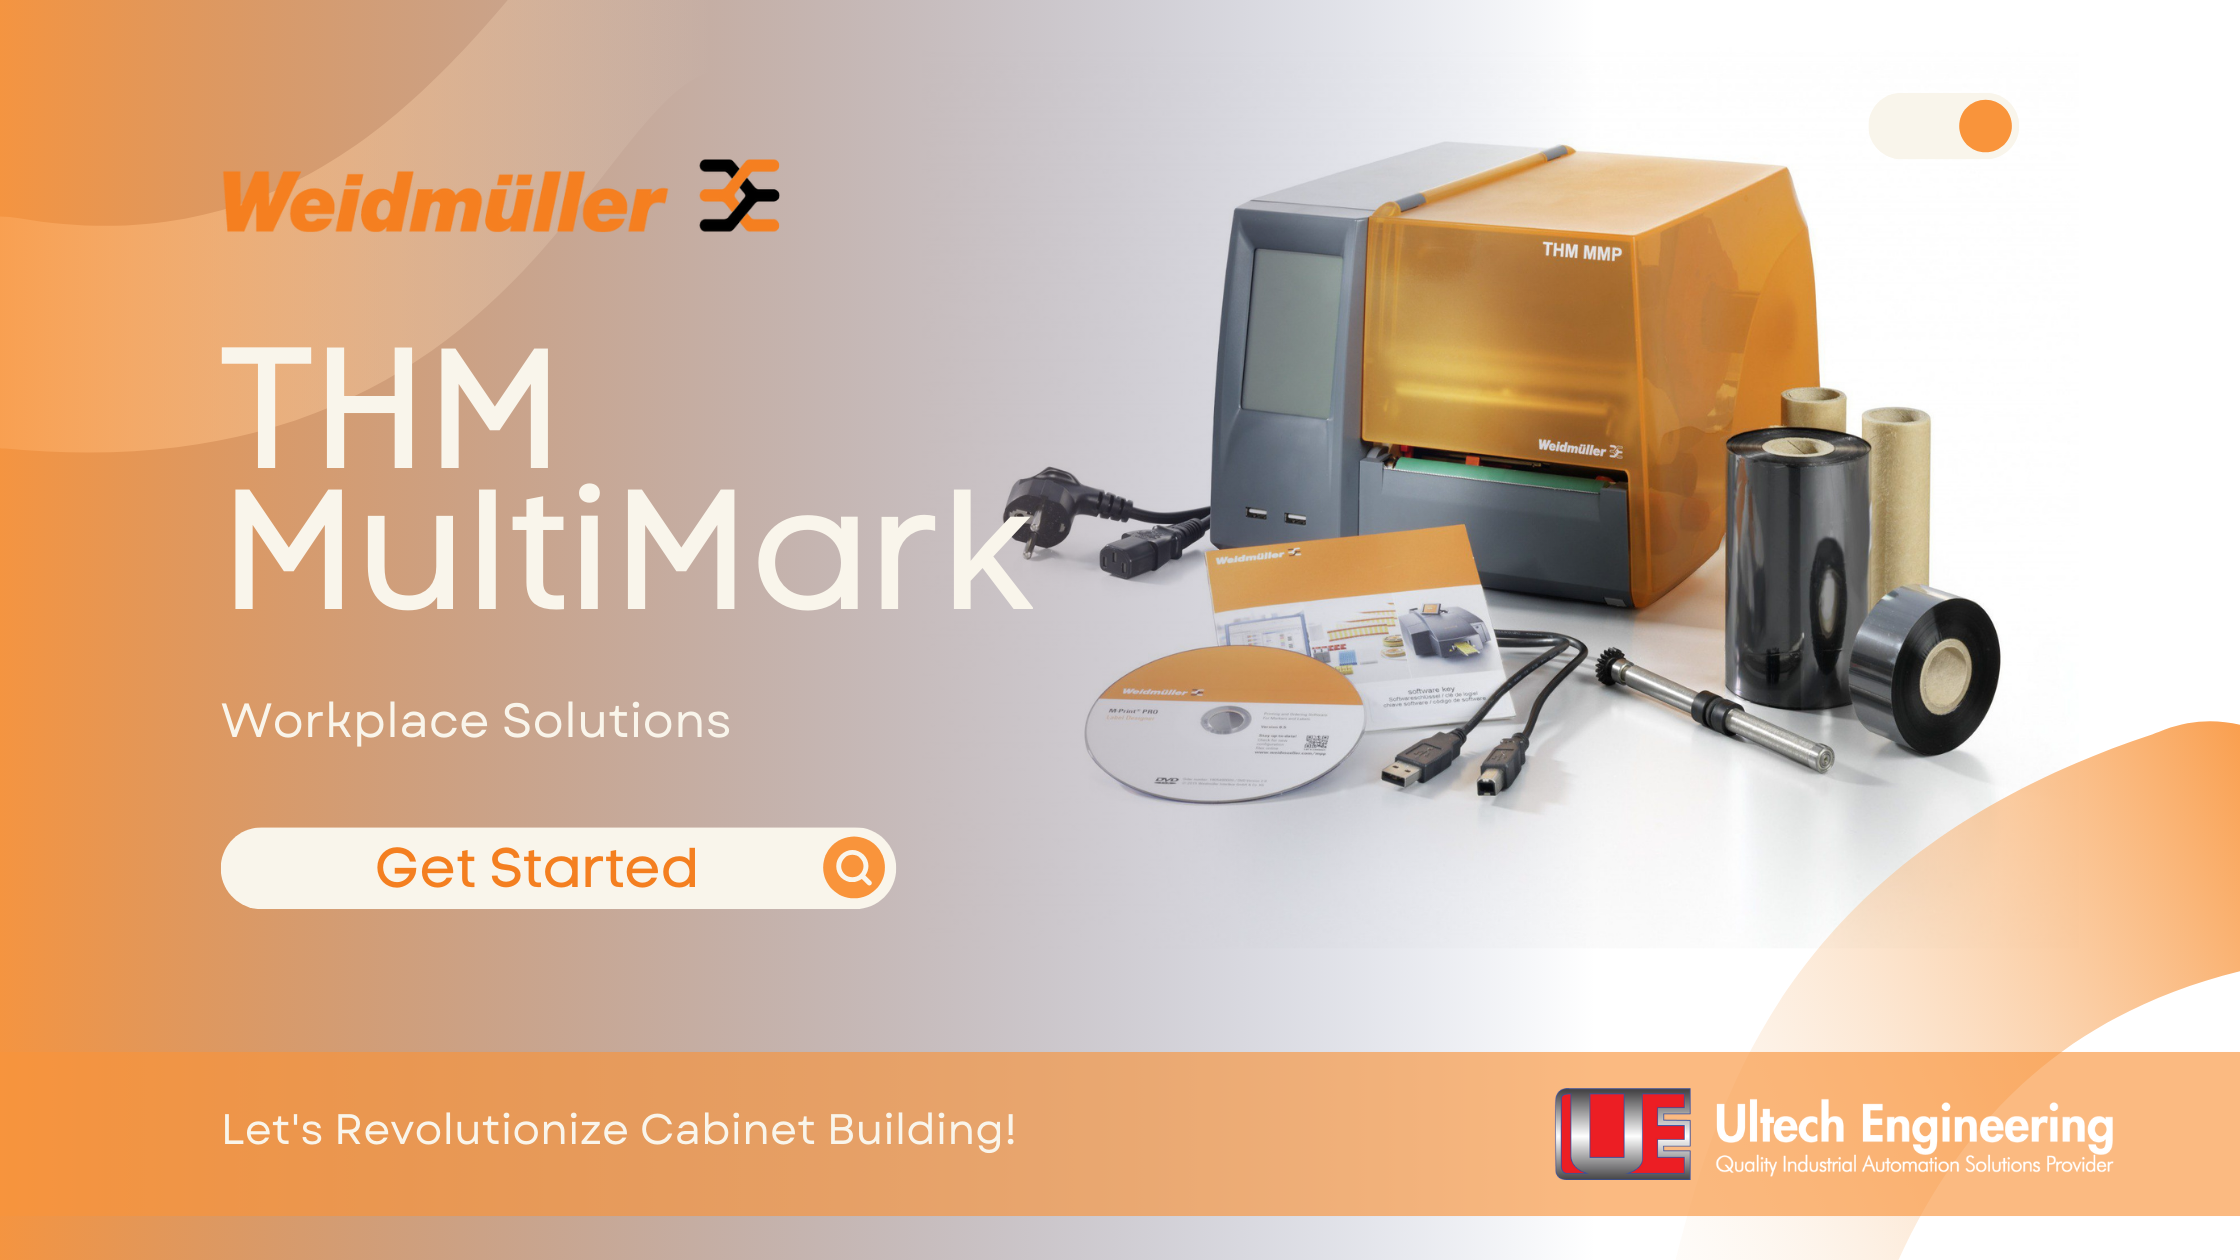 Let's Revolutionize Cabinet Building! Technician's Training with Weidmuller THM MultiMark